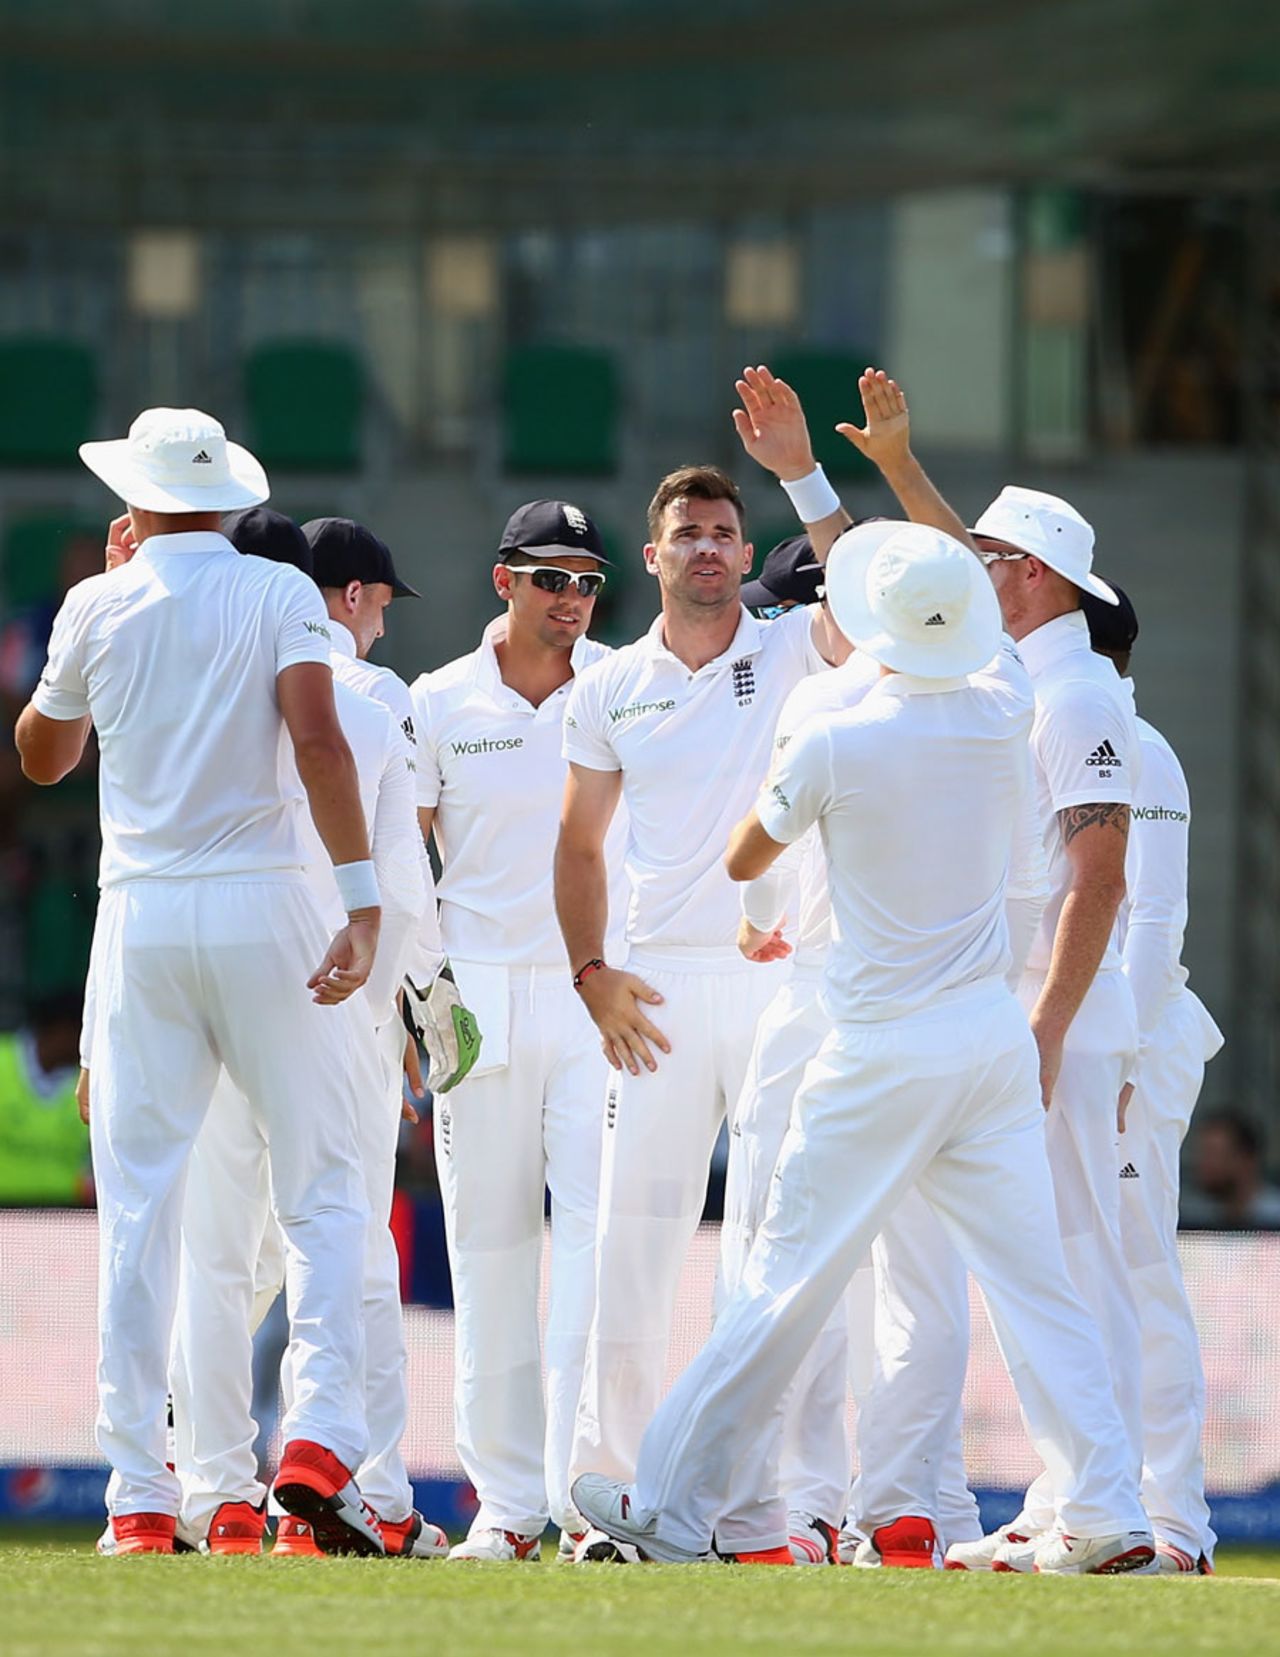 James Anderson struck in his second over, Pakistan v England, 1st Test, Abu Dhabi, 1st day, October 13, 2015